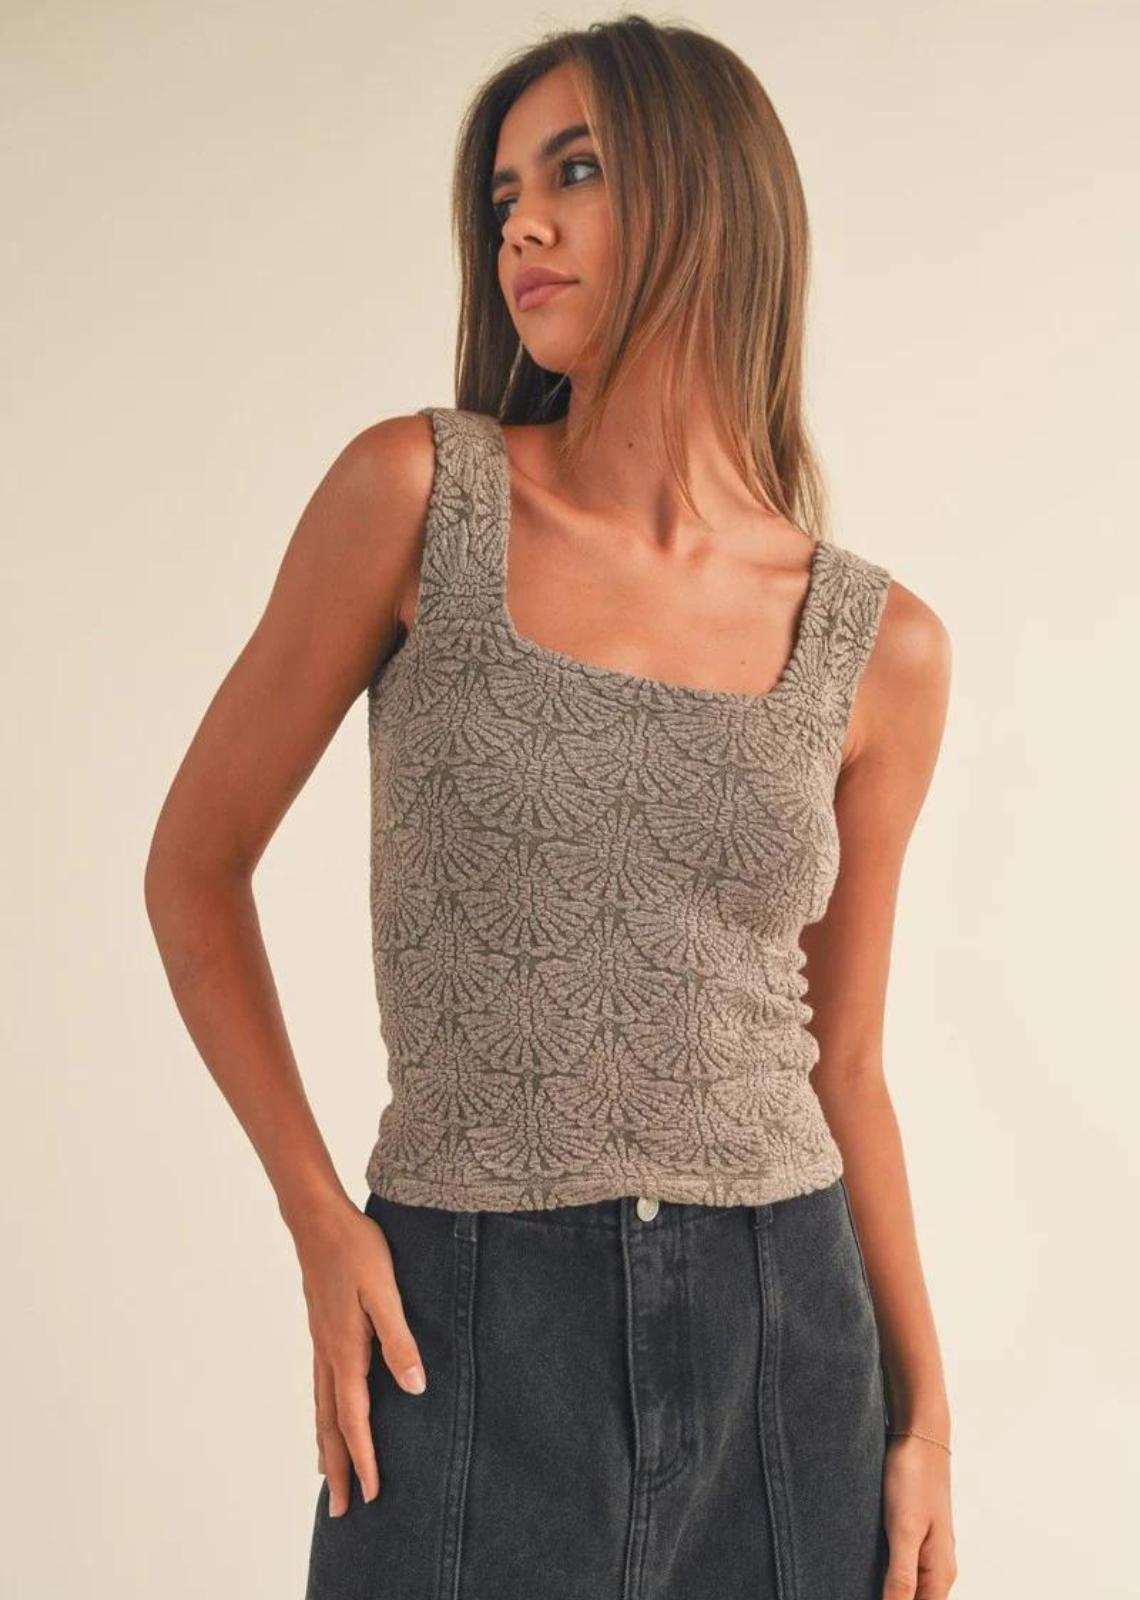 Miou Muse Washed Knit Top - Mocha.  The perfect minimalistic terry cloth like knitted shirt. Subtle details in the shirt which makes it the perfect summer top to dress up or down. 